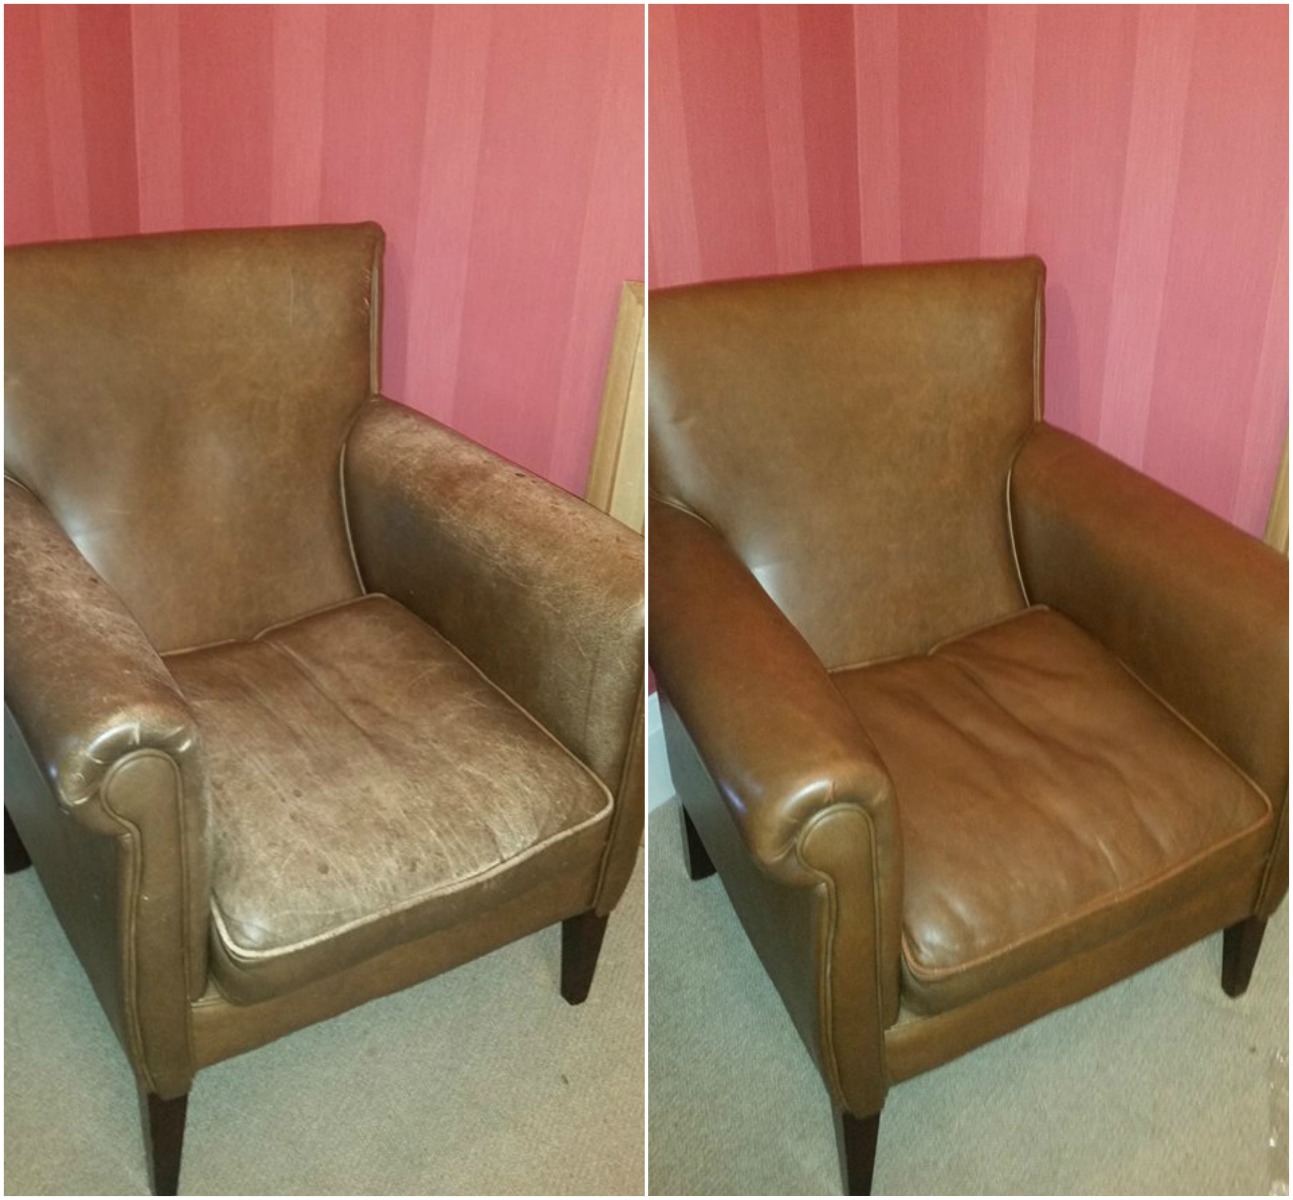 Restoring Colour To A Faded Leather Sofa, How To Protect Leather Sofa From Sun Damage